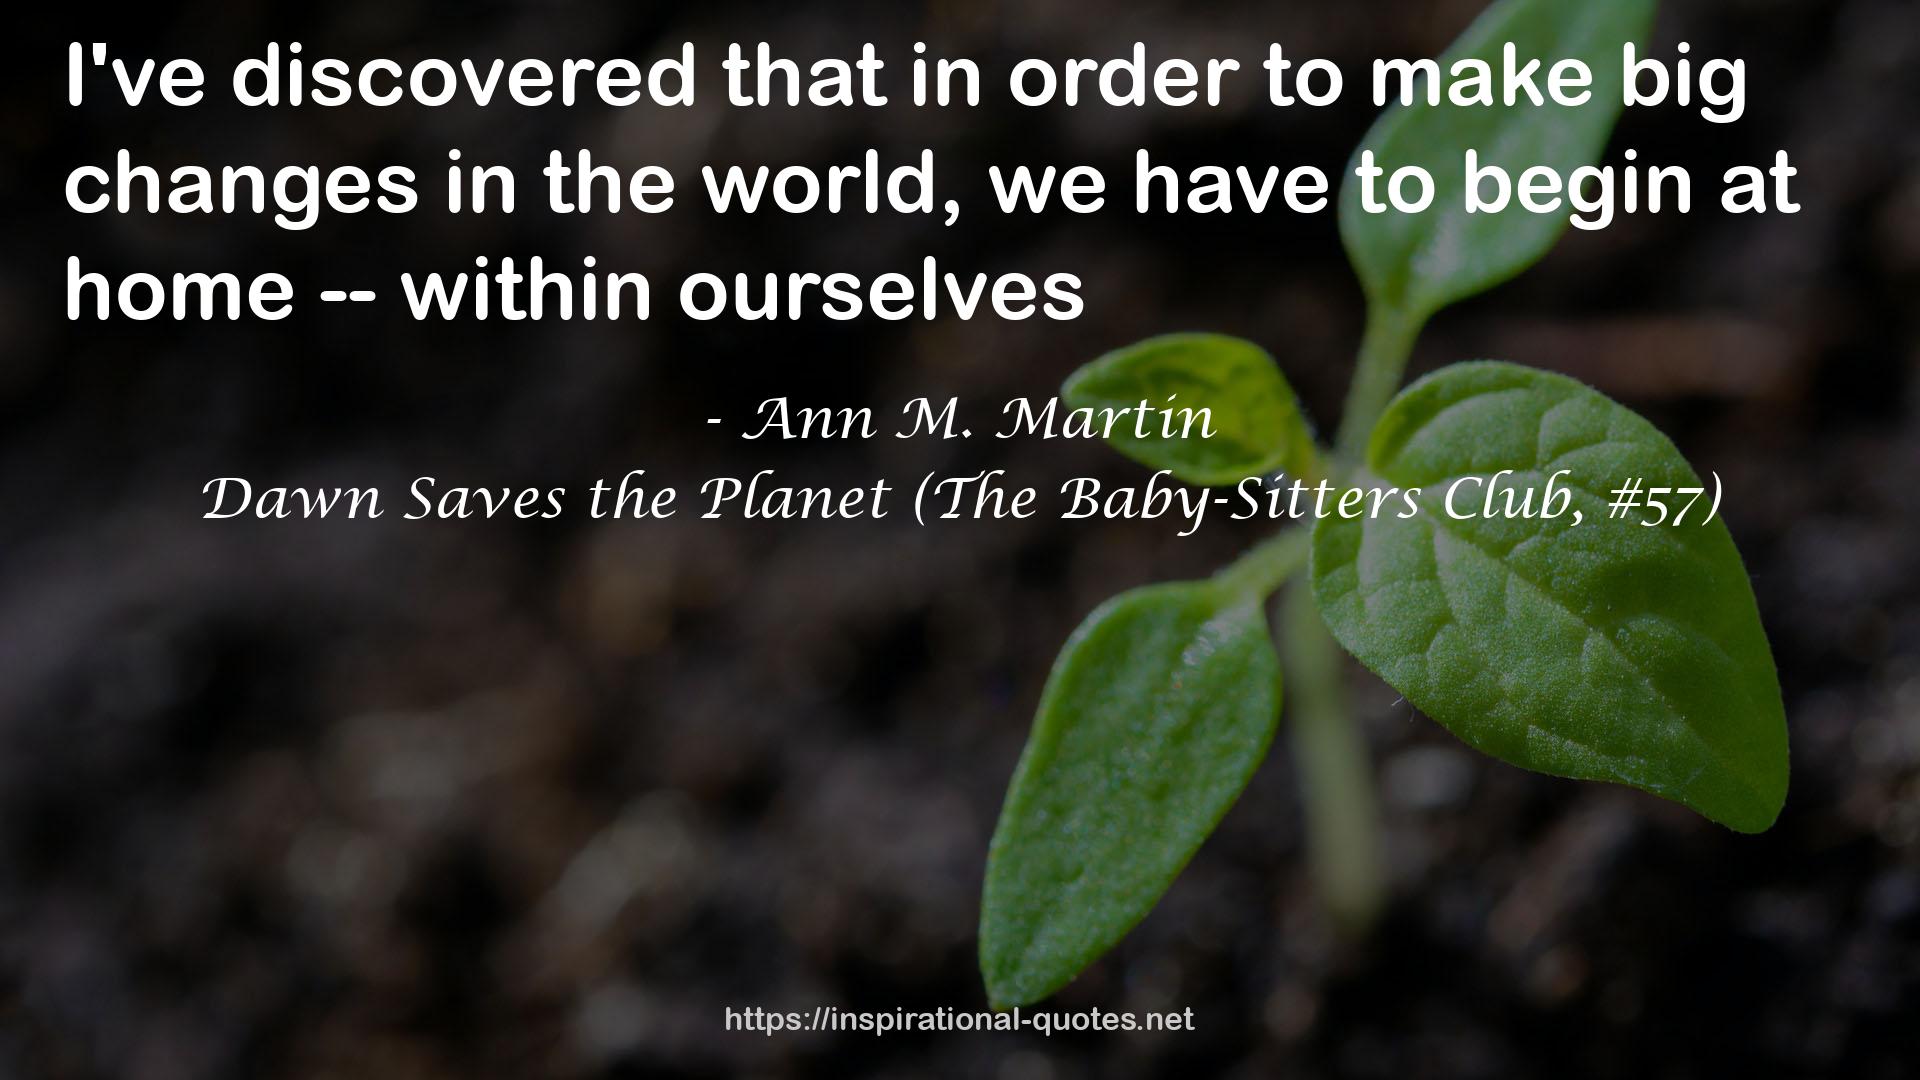 Dawn Saves the Planet (The Baby-Sitters Club, #57) QUOTES